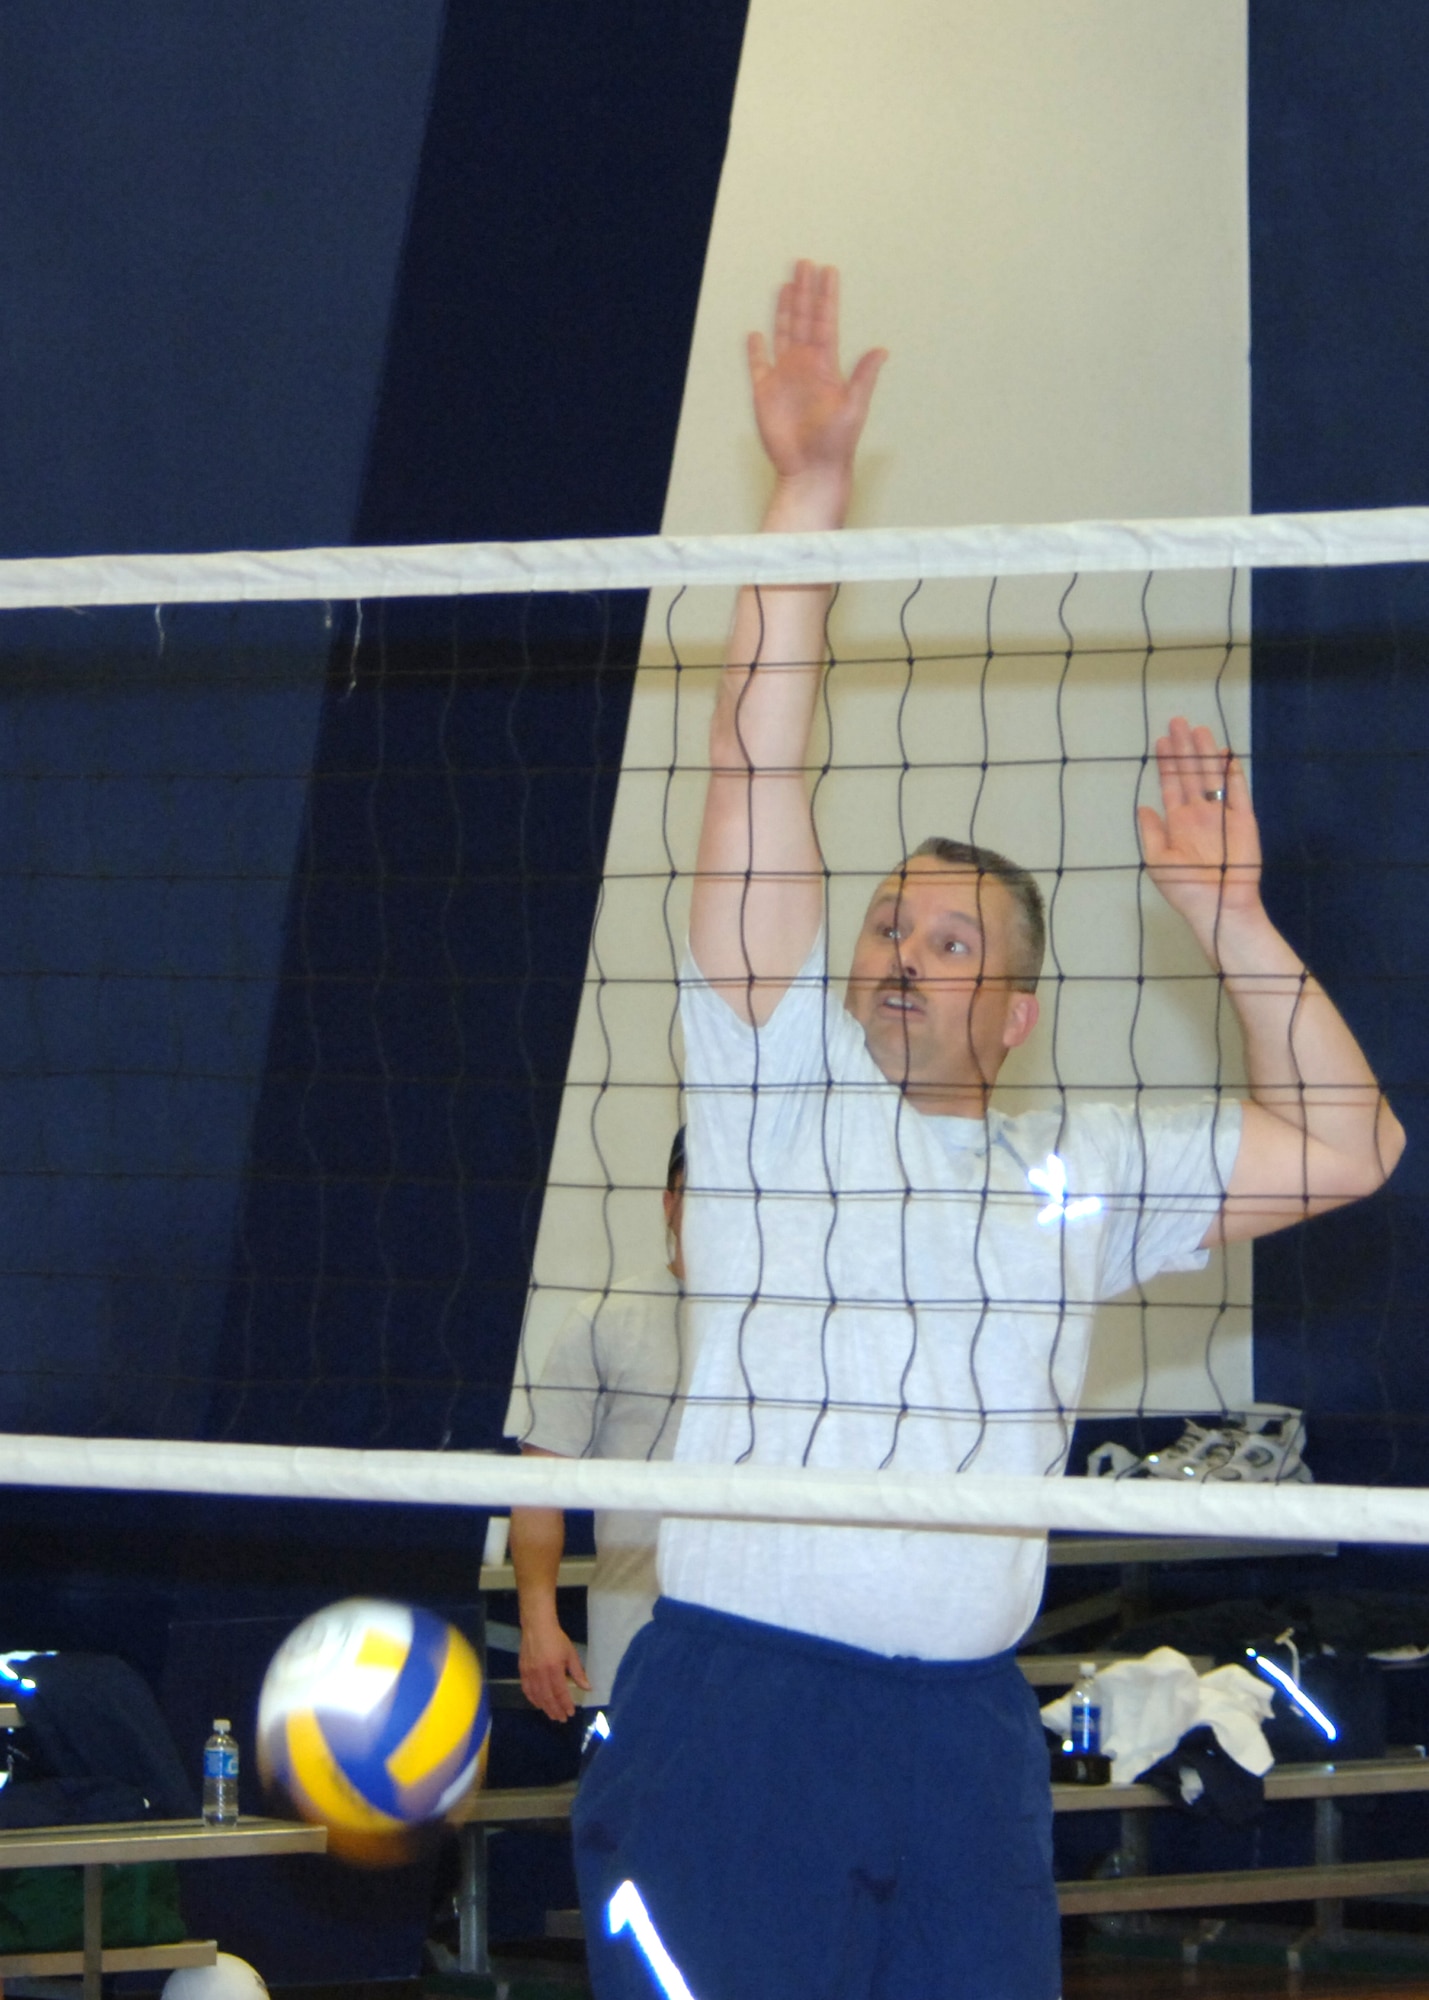 MISAWA AIR BASE, Japan -- Chief Master Sgt. select Jeffrey Felty, with the 35th Civil Engineer Squadron, spikes the ball over the net during the Eagles vs Chiefs volleyball game at the Potter Fitness Center, March 14, 2008.  The Chiefs scored victory in the best-out-of-five games competition.  (U.S. Air Force photo by Senior Airman Robert Barnett)